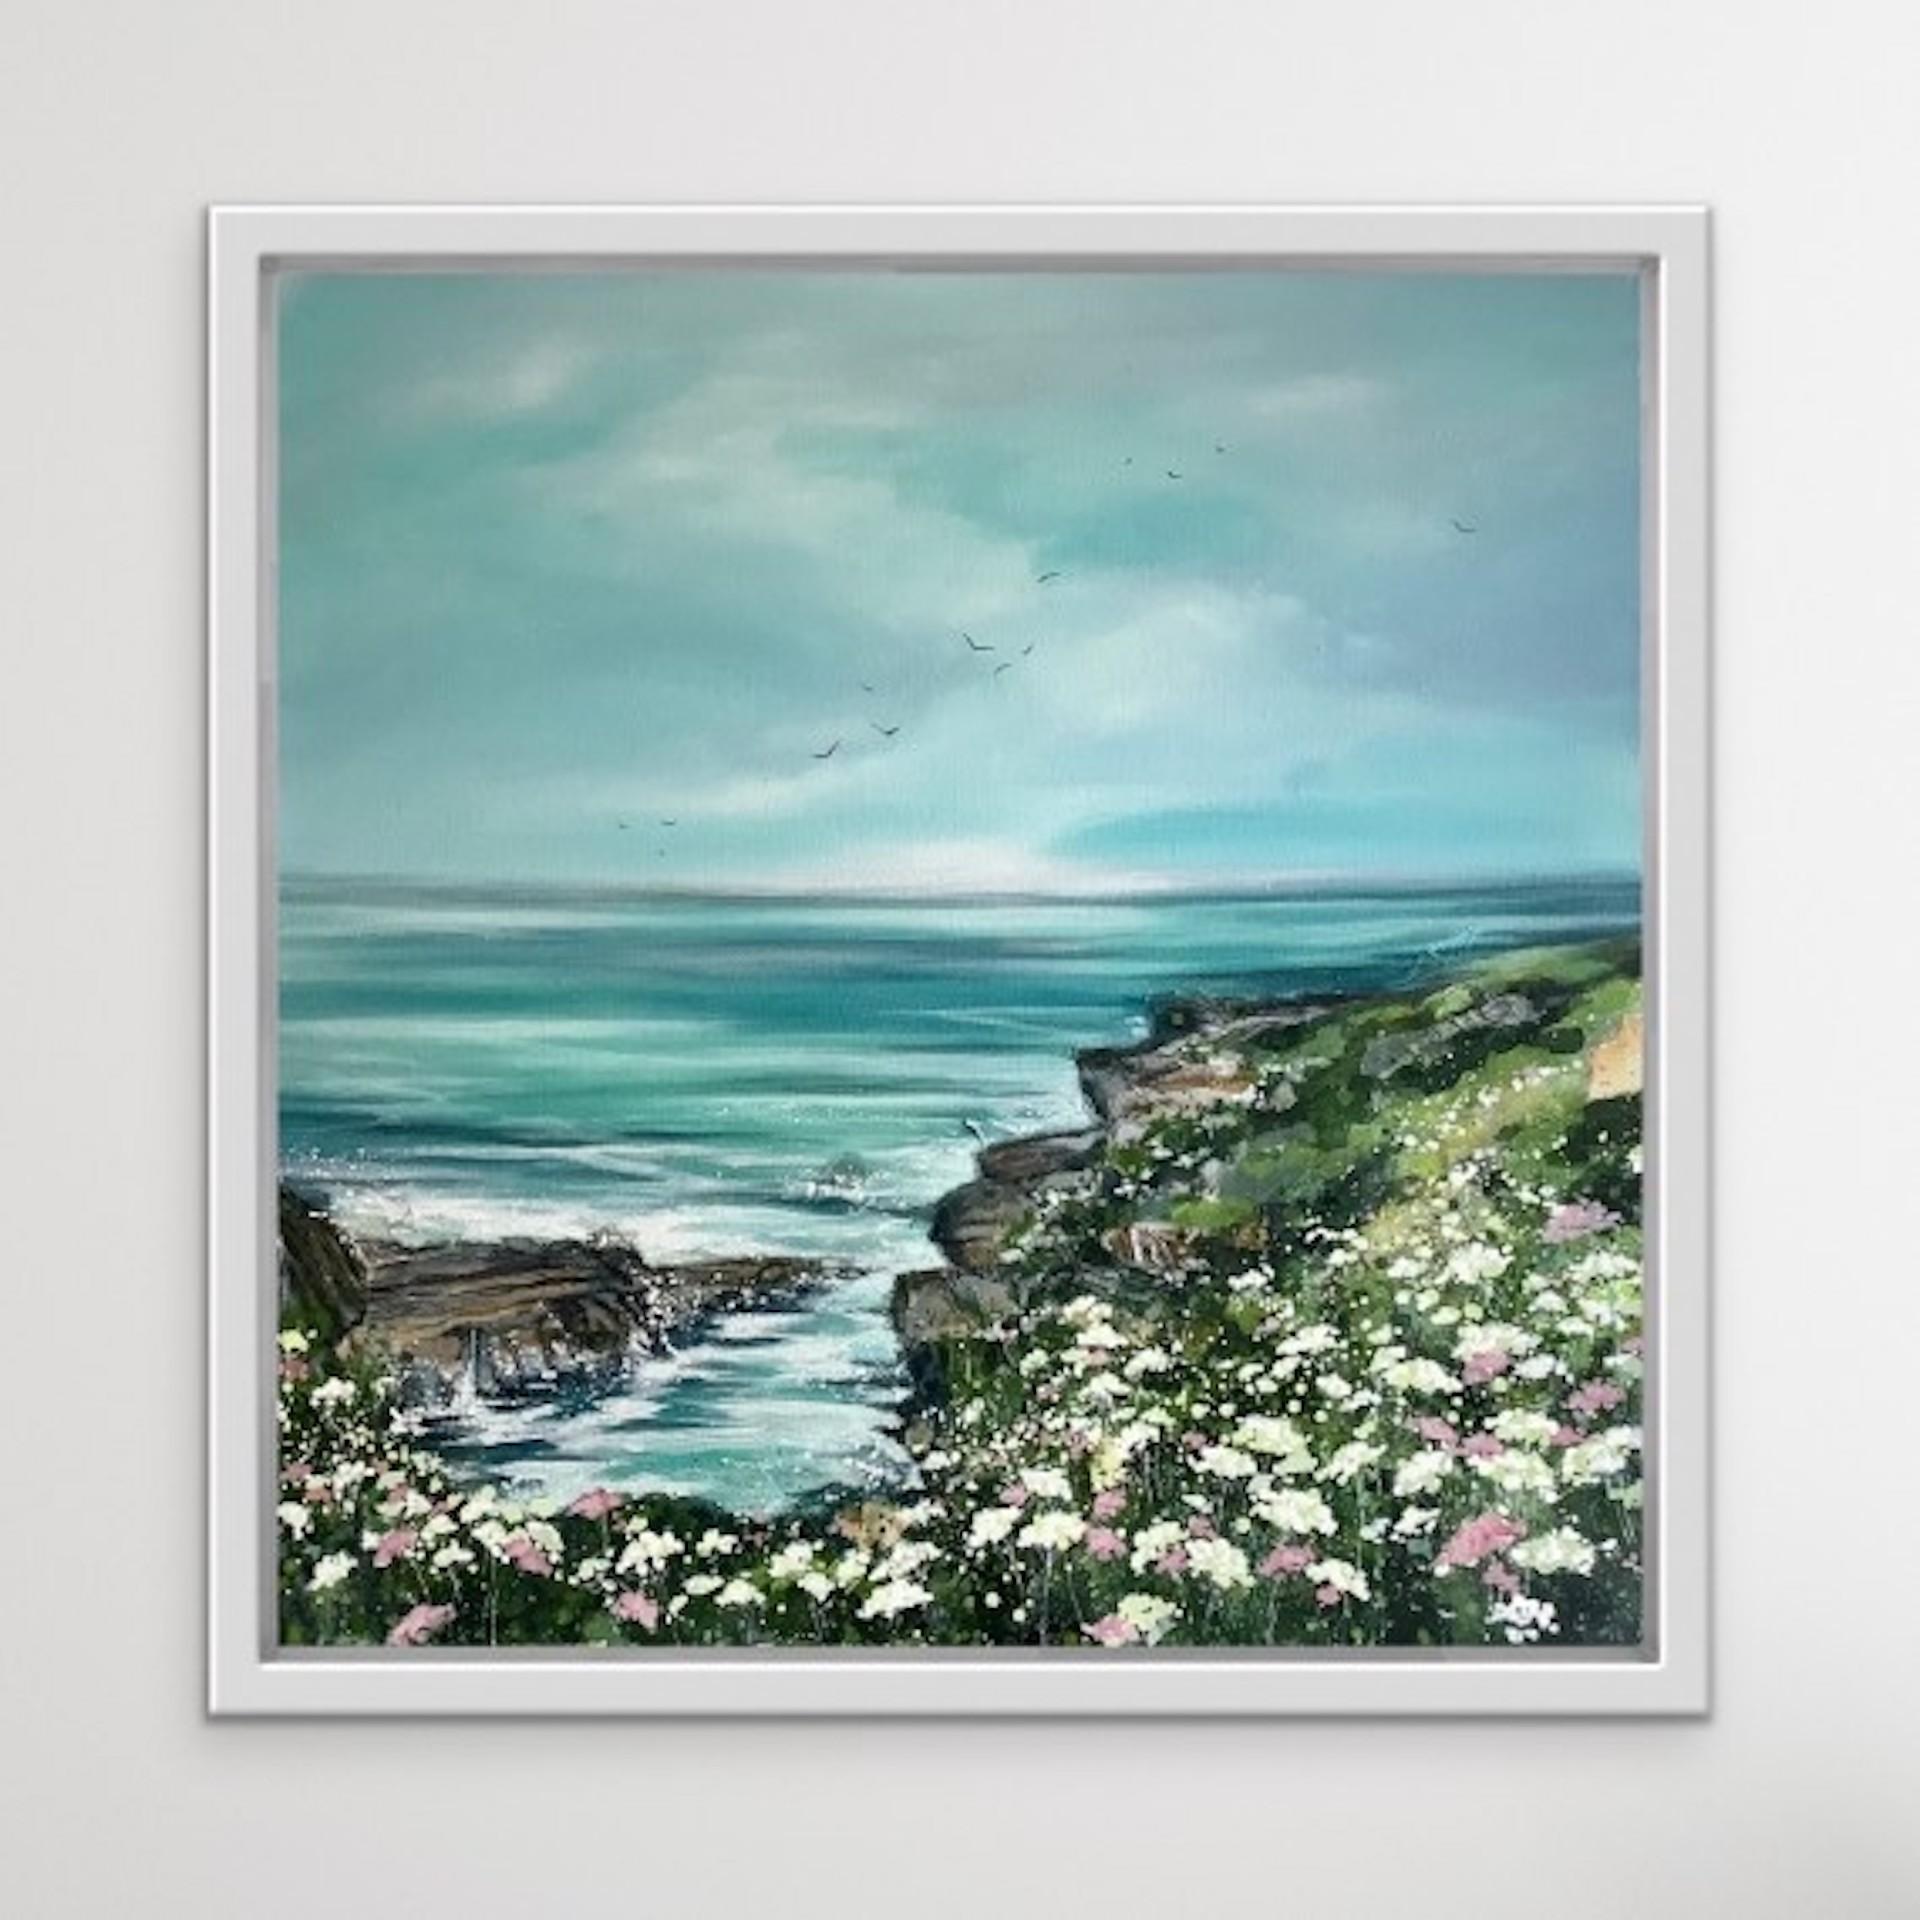 Aqua Tide [2021]
Original
Seascapes
Acrylic and acrylic inks on boxed canvas
Image size: H:60 cm x W:60 cm
Complete Size of Unframed Work: H:60 cm x W:60 cm x D:4cm
Framed Size: H:65 cm x W:65 cm x D:5cm
Sold Framed
Please note that insitu images